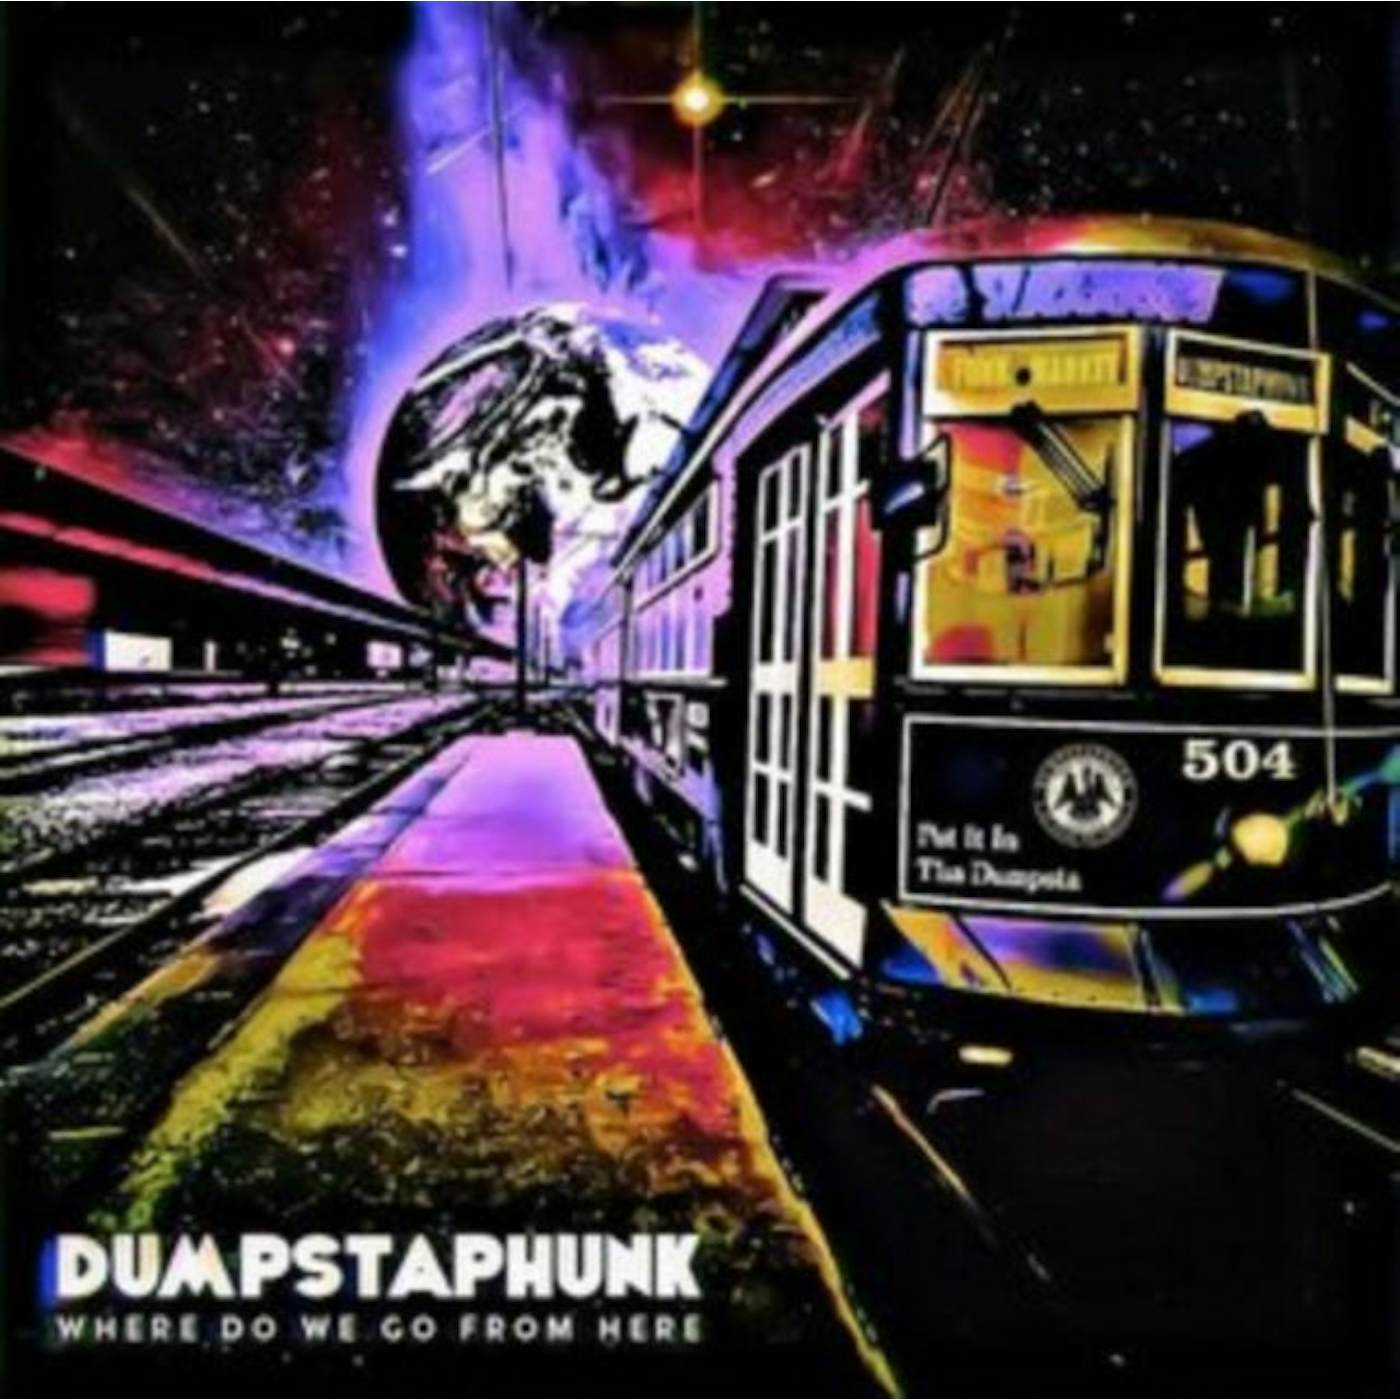 Dumpstaphunk CD - Where Do We Go From Here